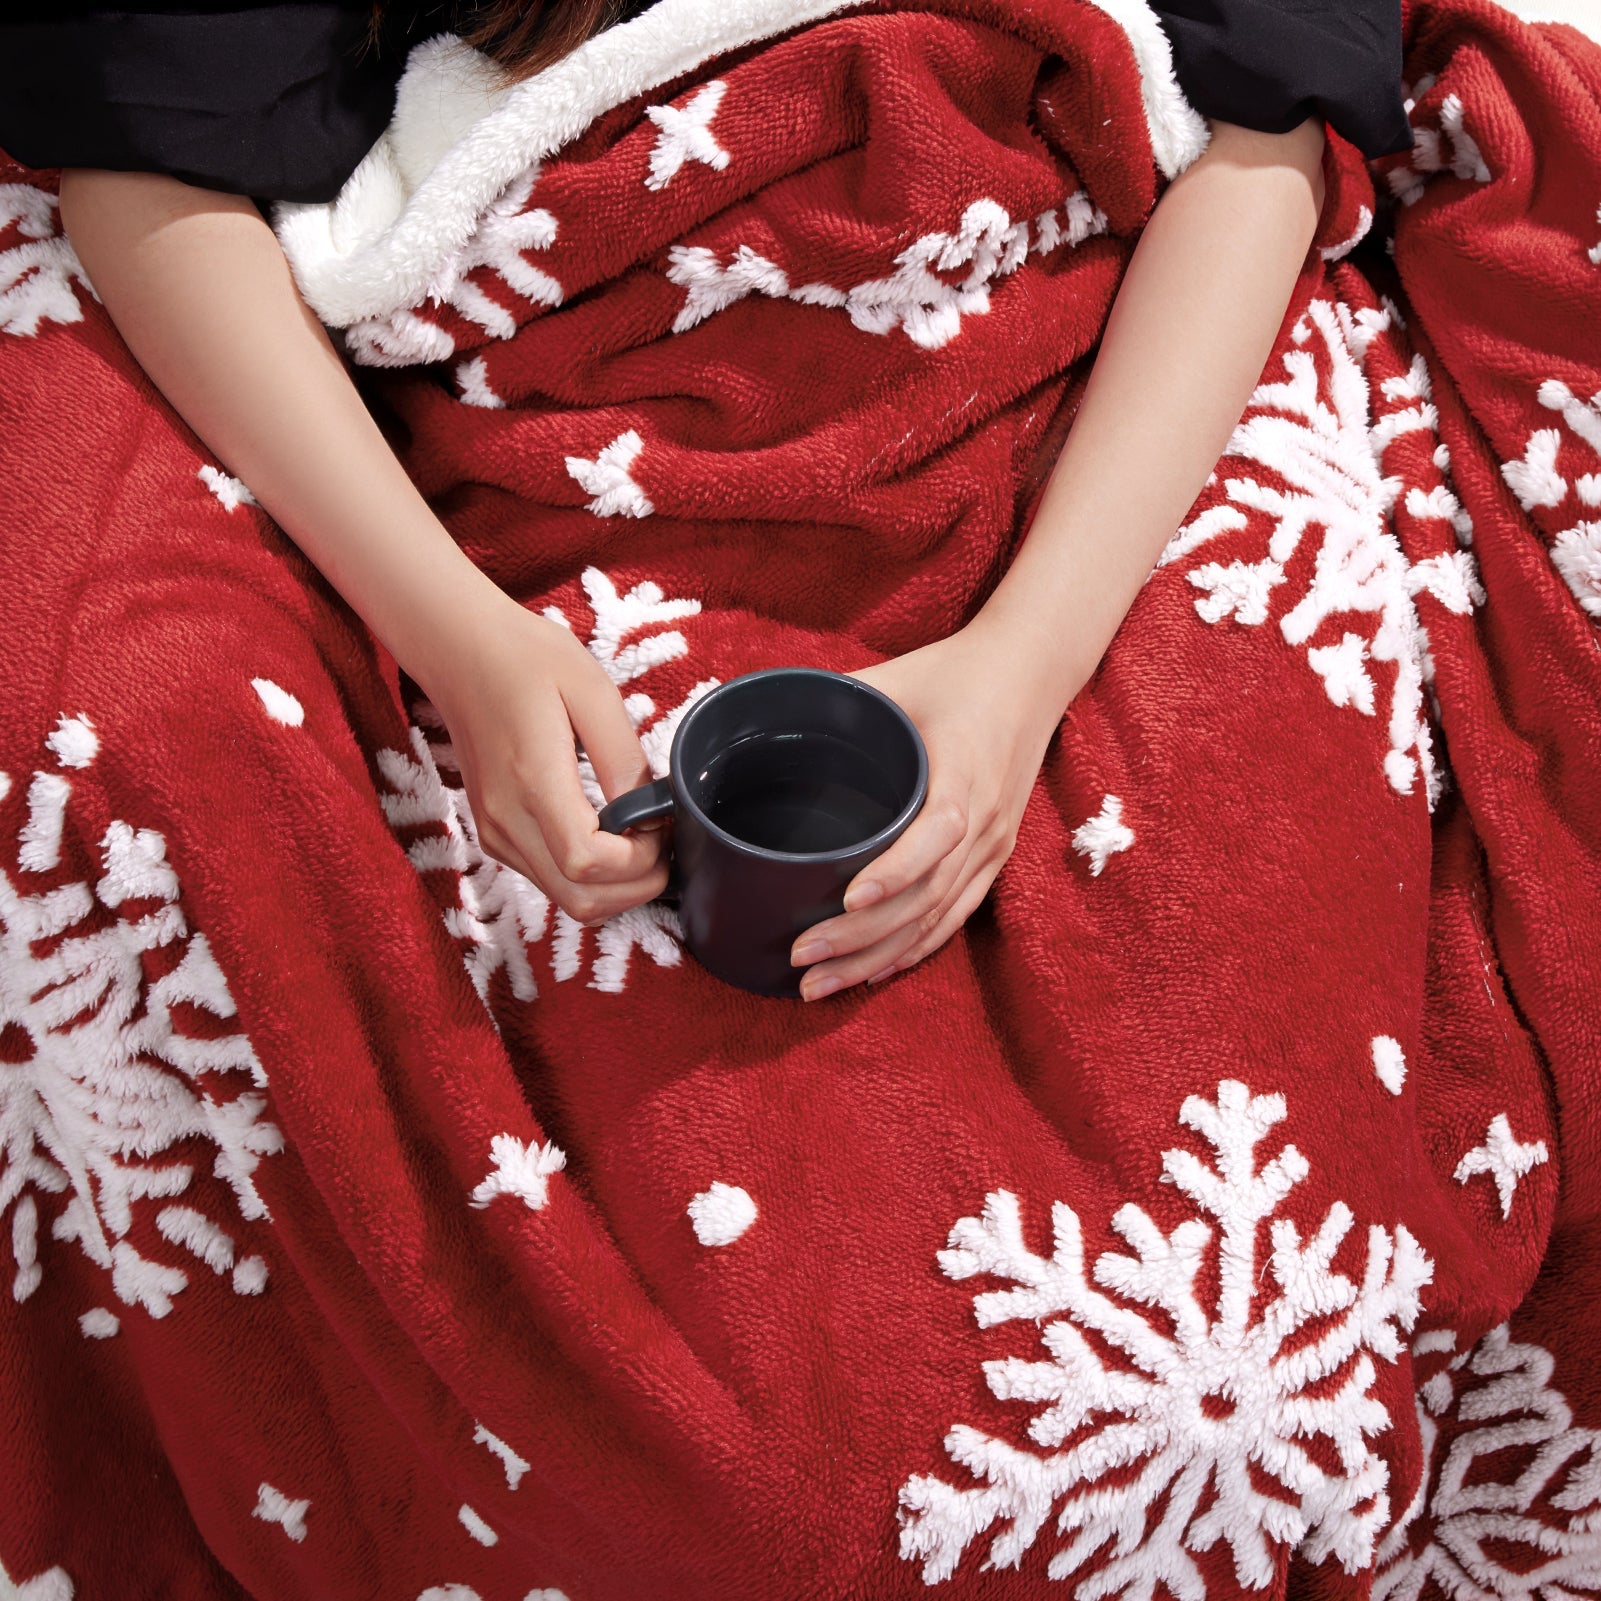 WBHome Christmas Sherpa Throw Blanket | | Soft, Warm, Cozy, Fuzzy Flannel Fleece Holiday Blanket for Bed Couch Sofa, 50x60 inch, (Red & White Snowflake)